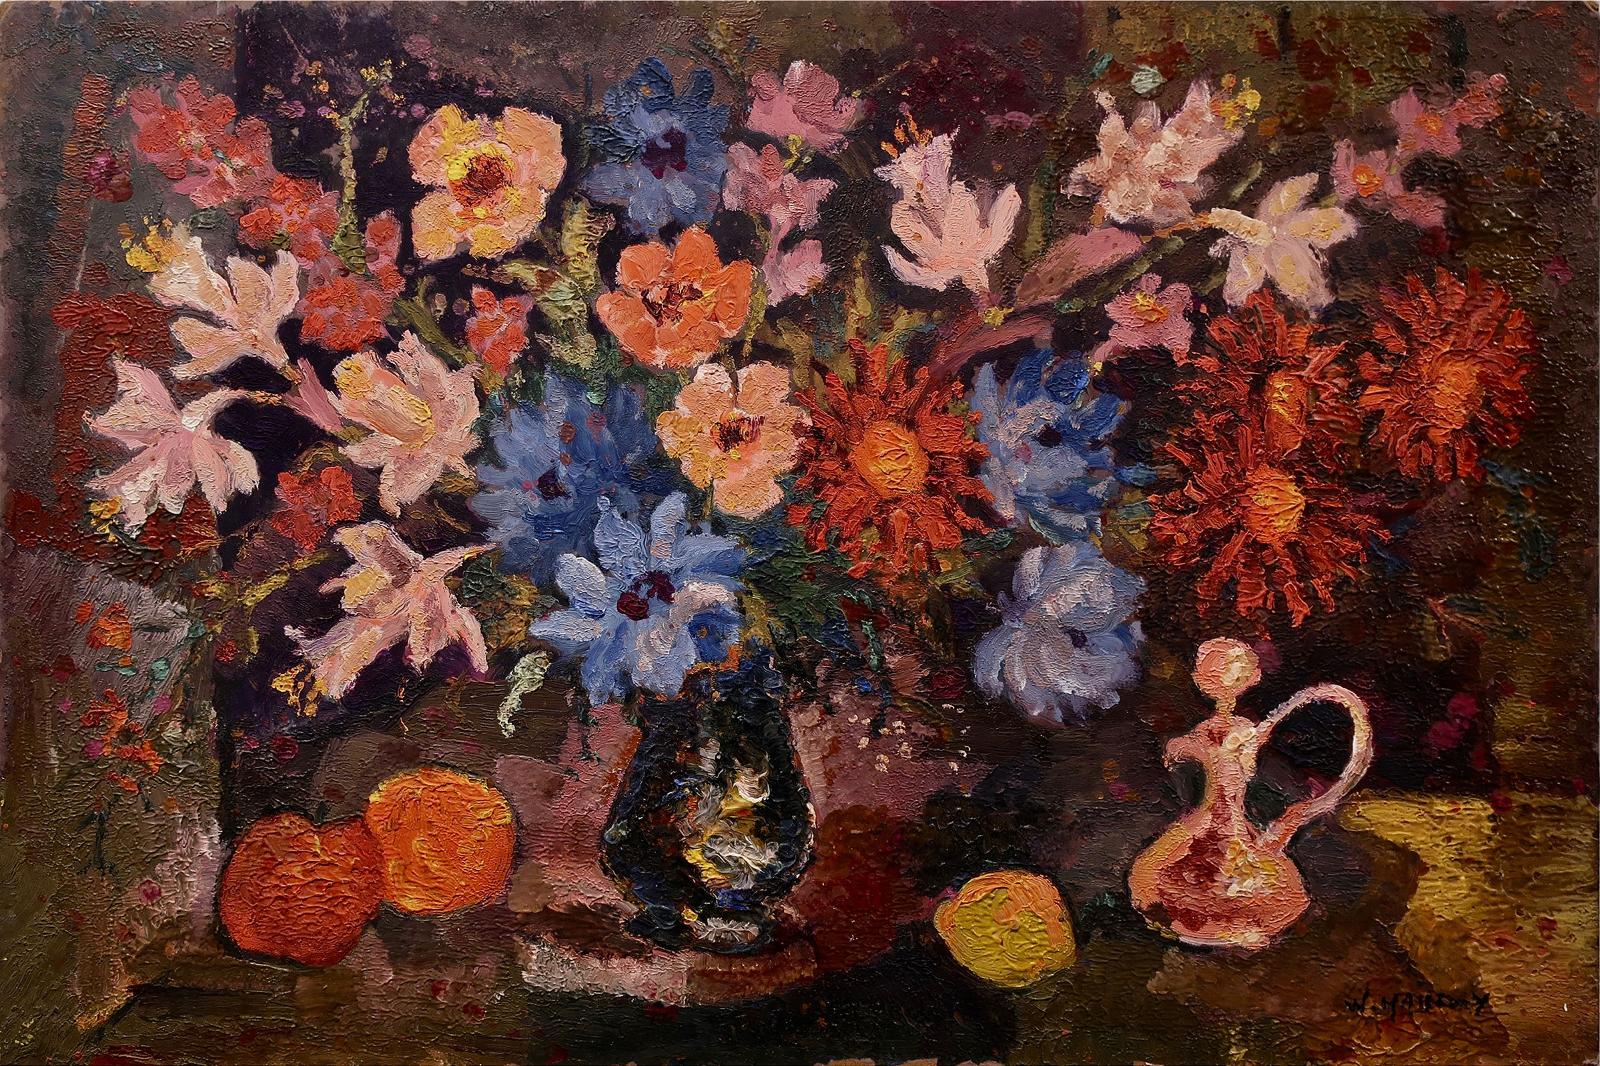 Wadie El Mahdy (1921-2001) - Untitled (Mixed Bouquet)